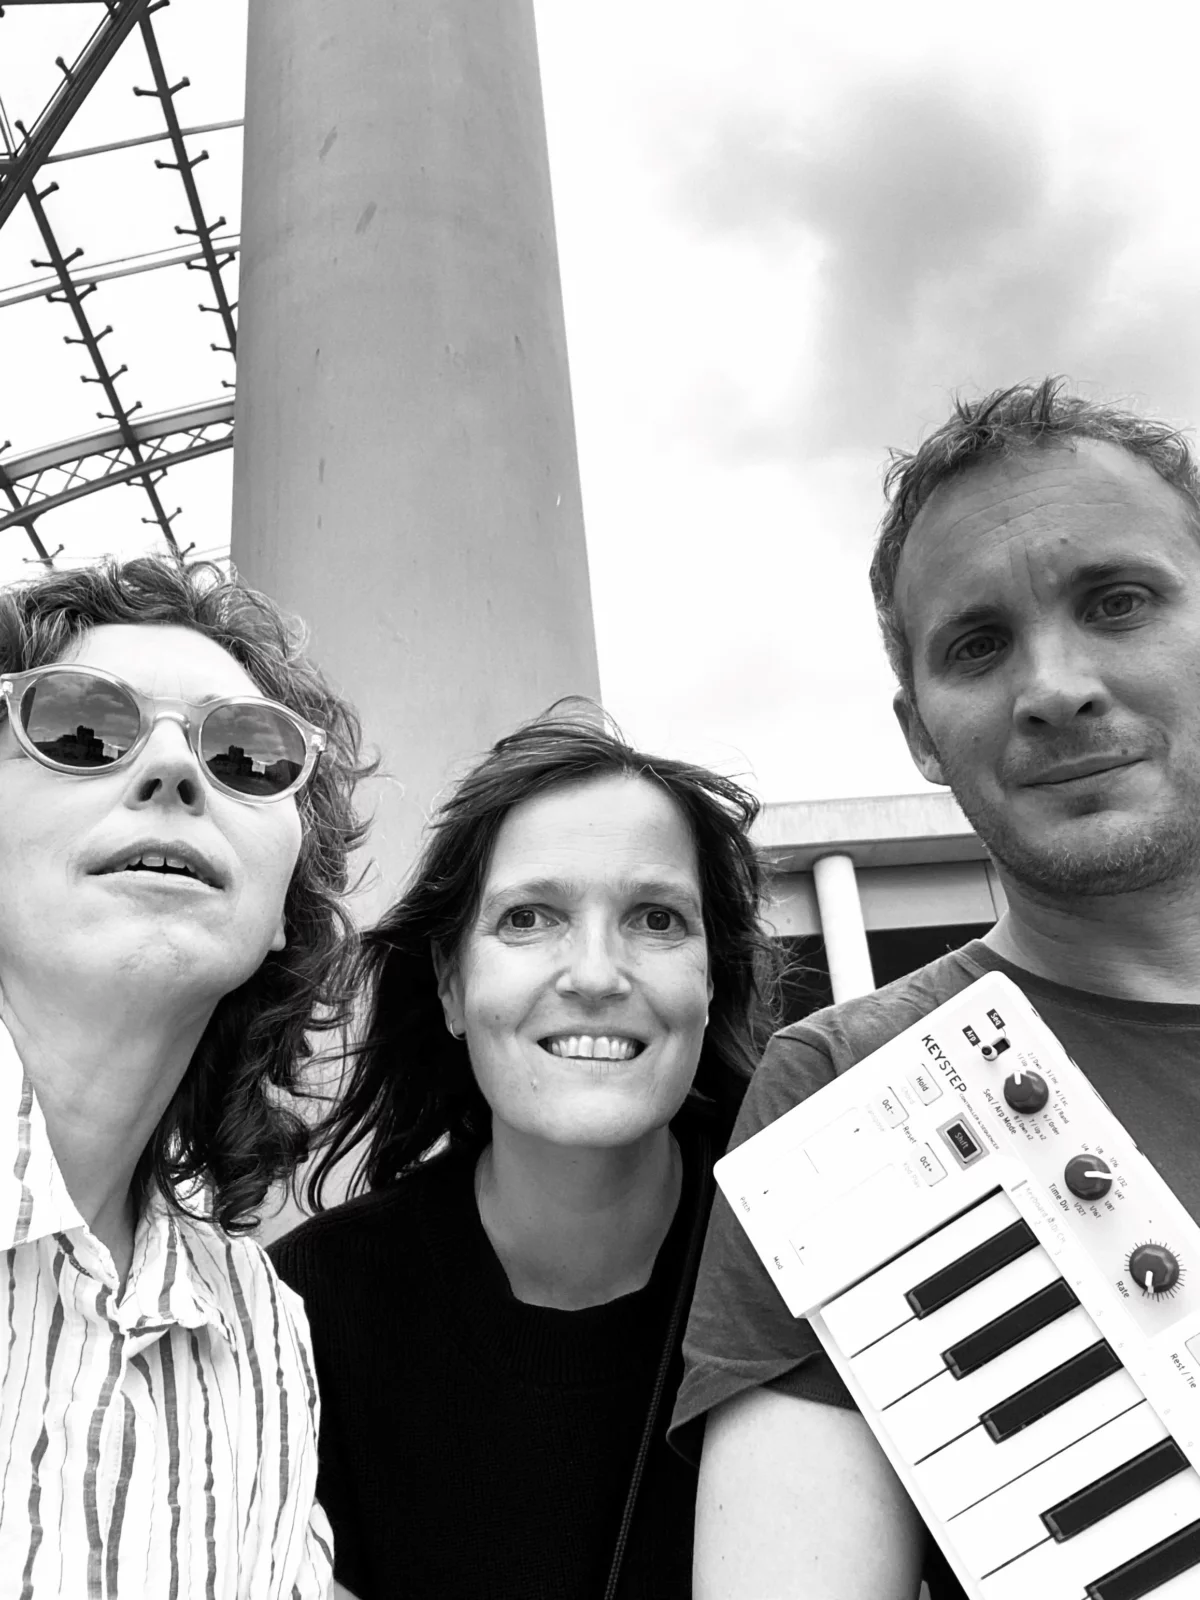 Black and white photo of artists SE Struck and Alexandra Knieps together with musician Philip Zoubek holding a keyboard in front of him.